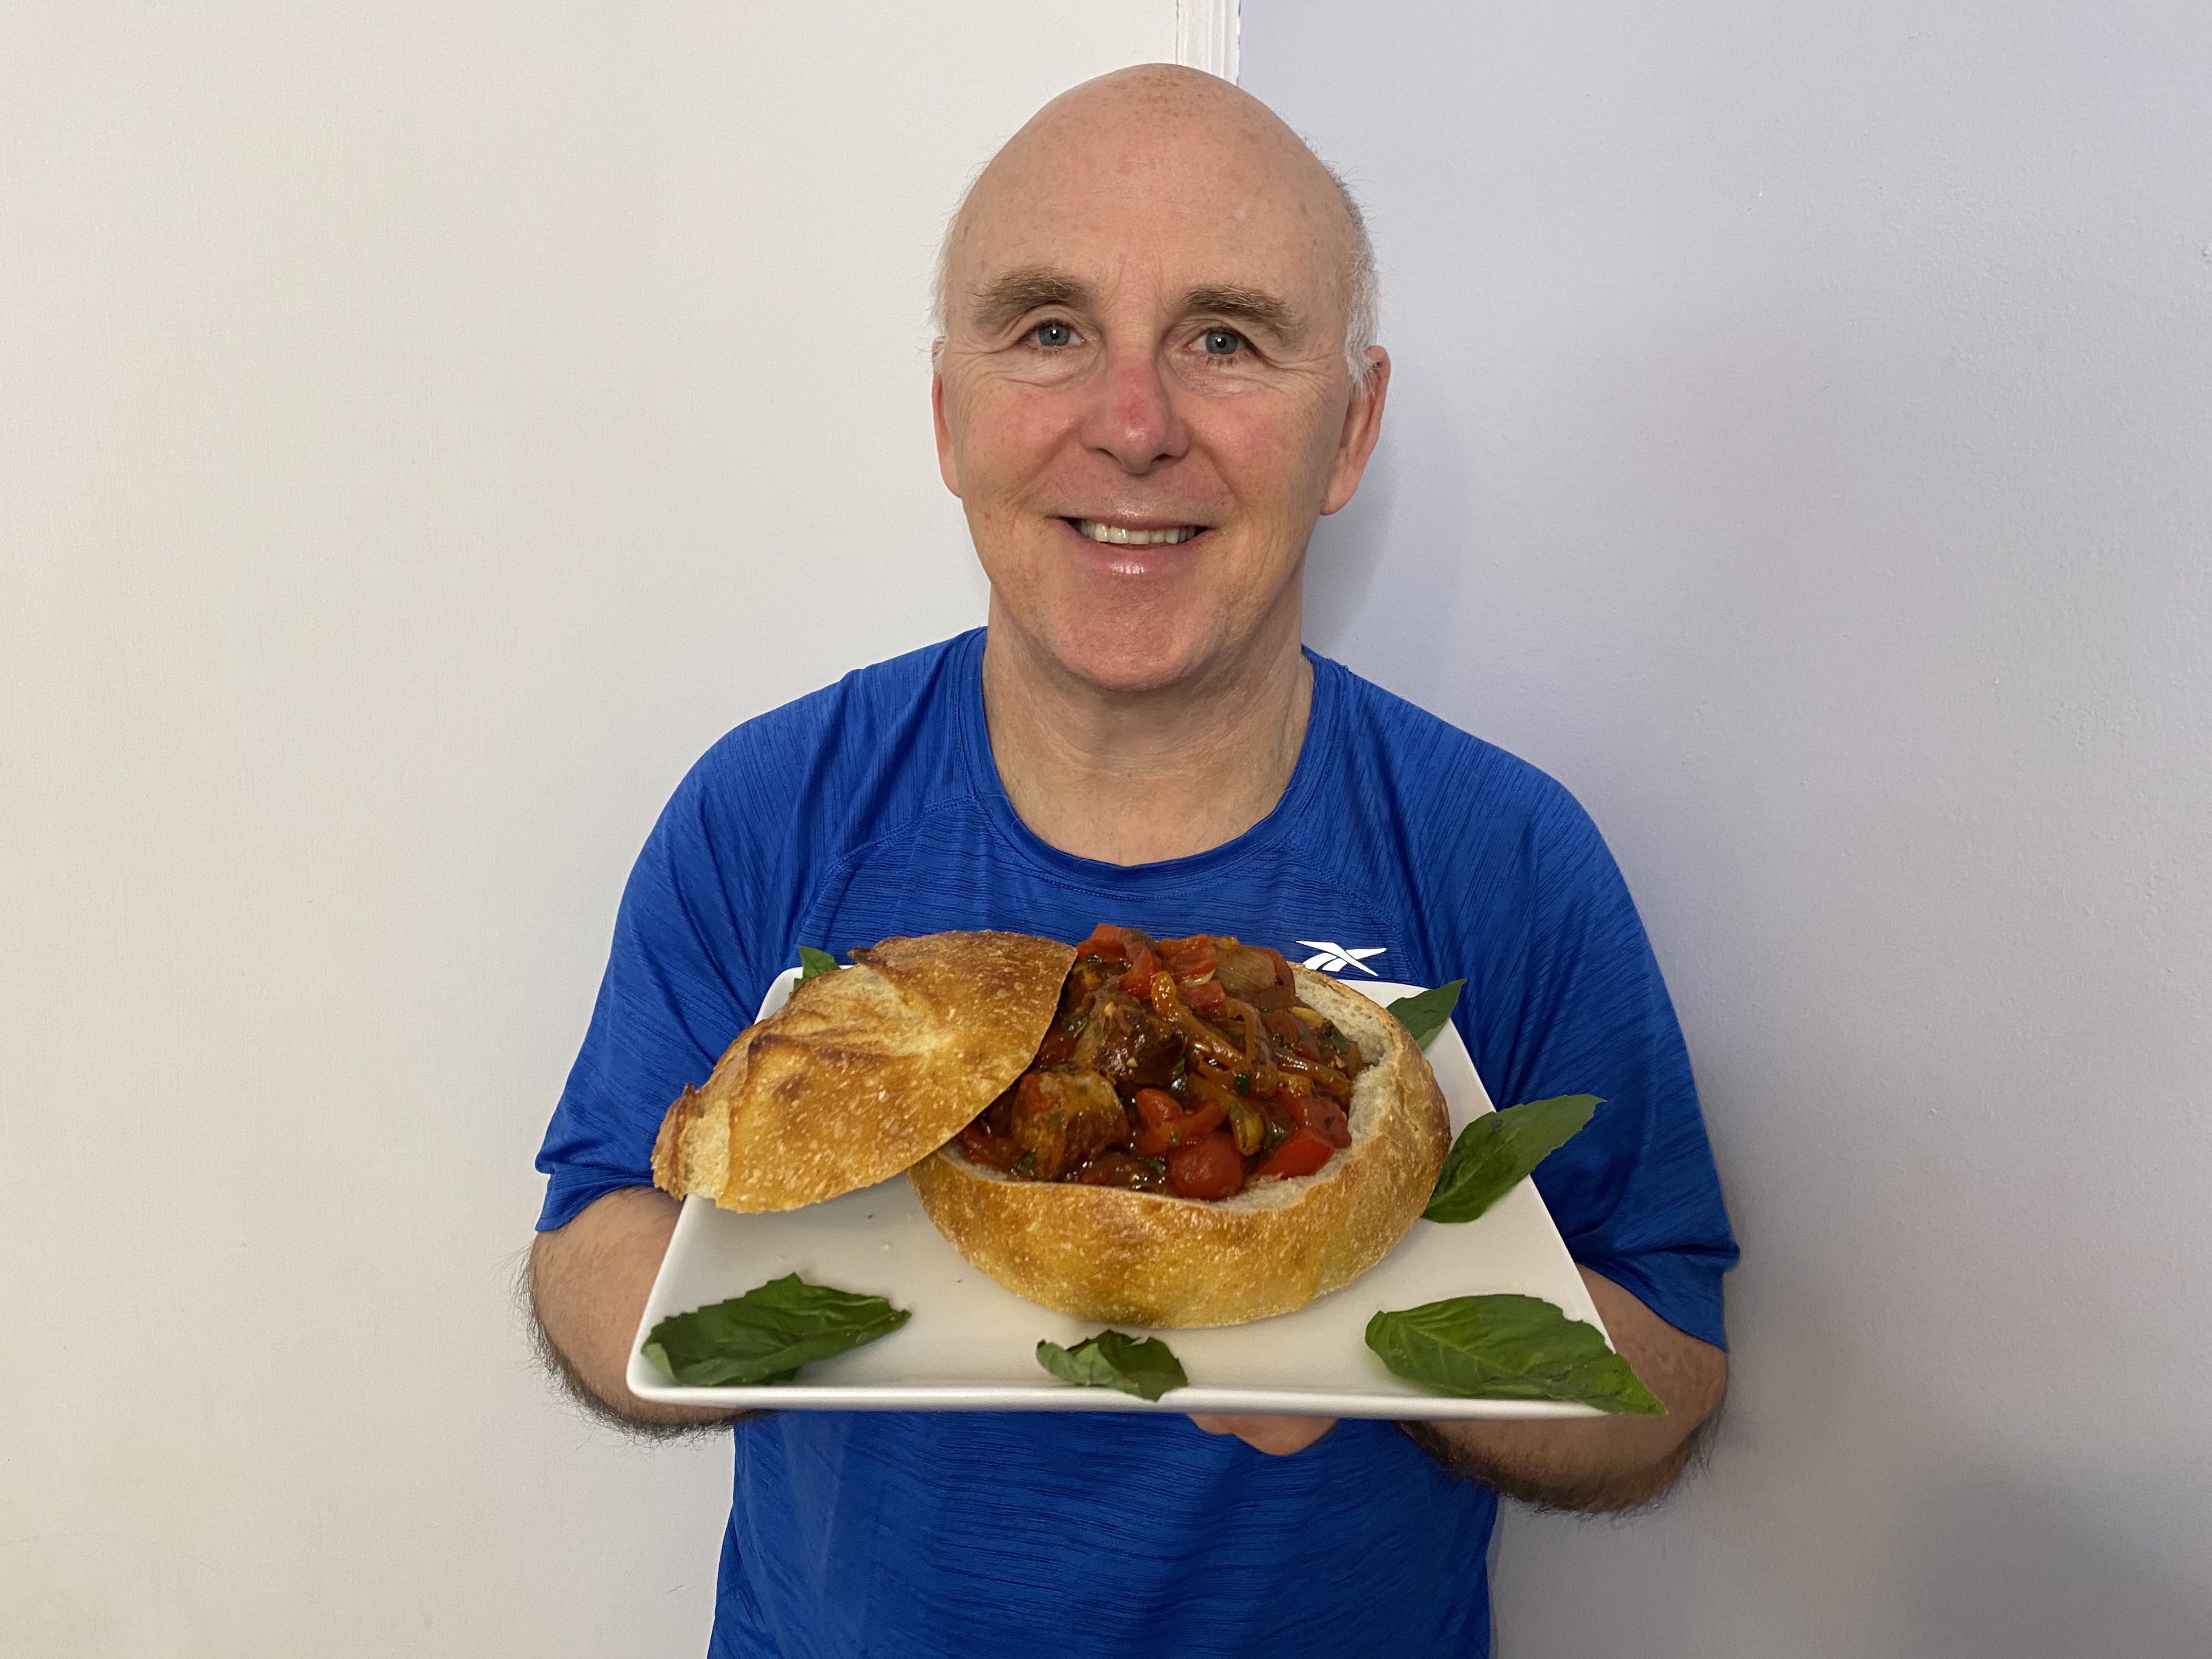 Chef Rob holding a plate containing Sausage, Peppers and Onions in a Bread Bowl.